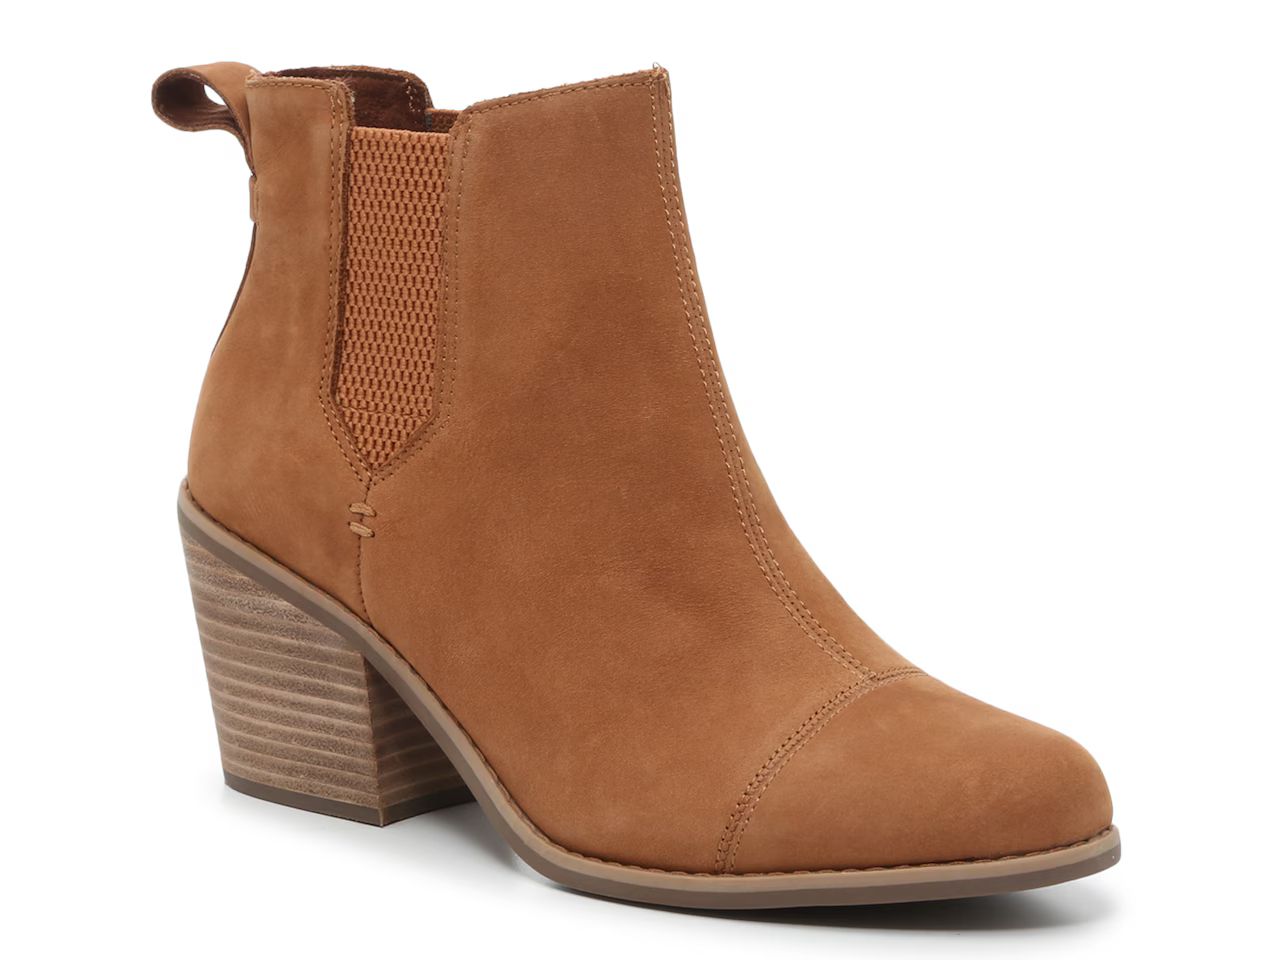 TOMS Everly Chelsea Boot - Women's | DSW